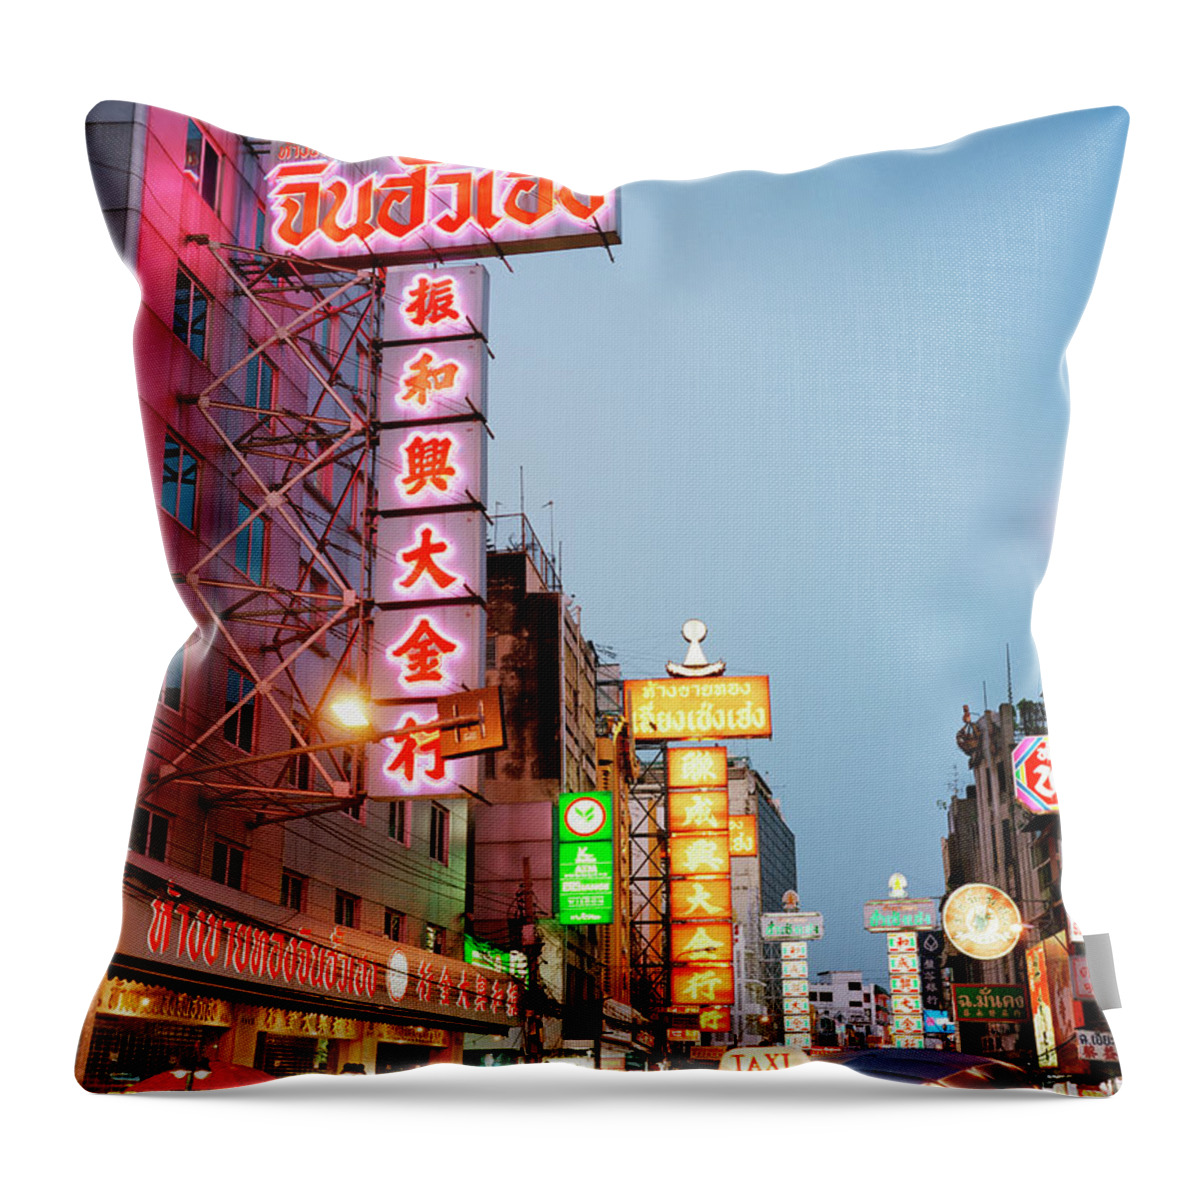 Chinatown Throw Pillow featuring the photograph Bustling Street In Chinatown At Dusk by Gary Yeowell